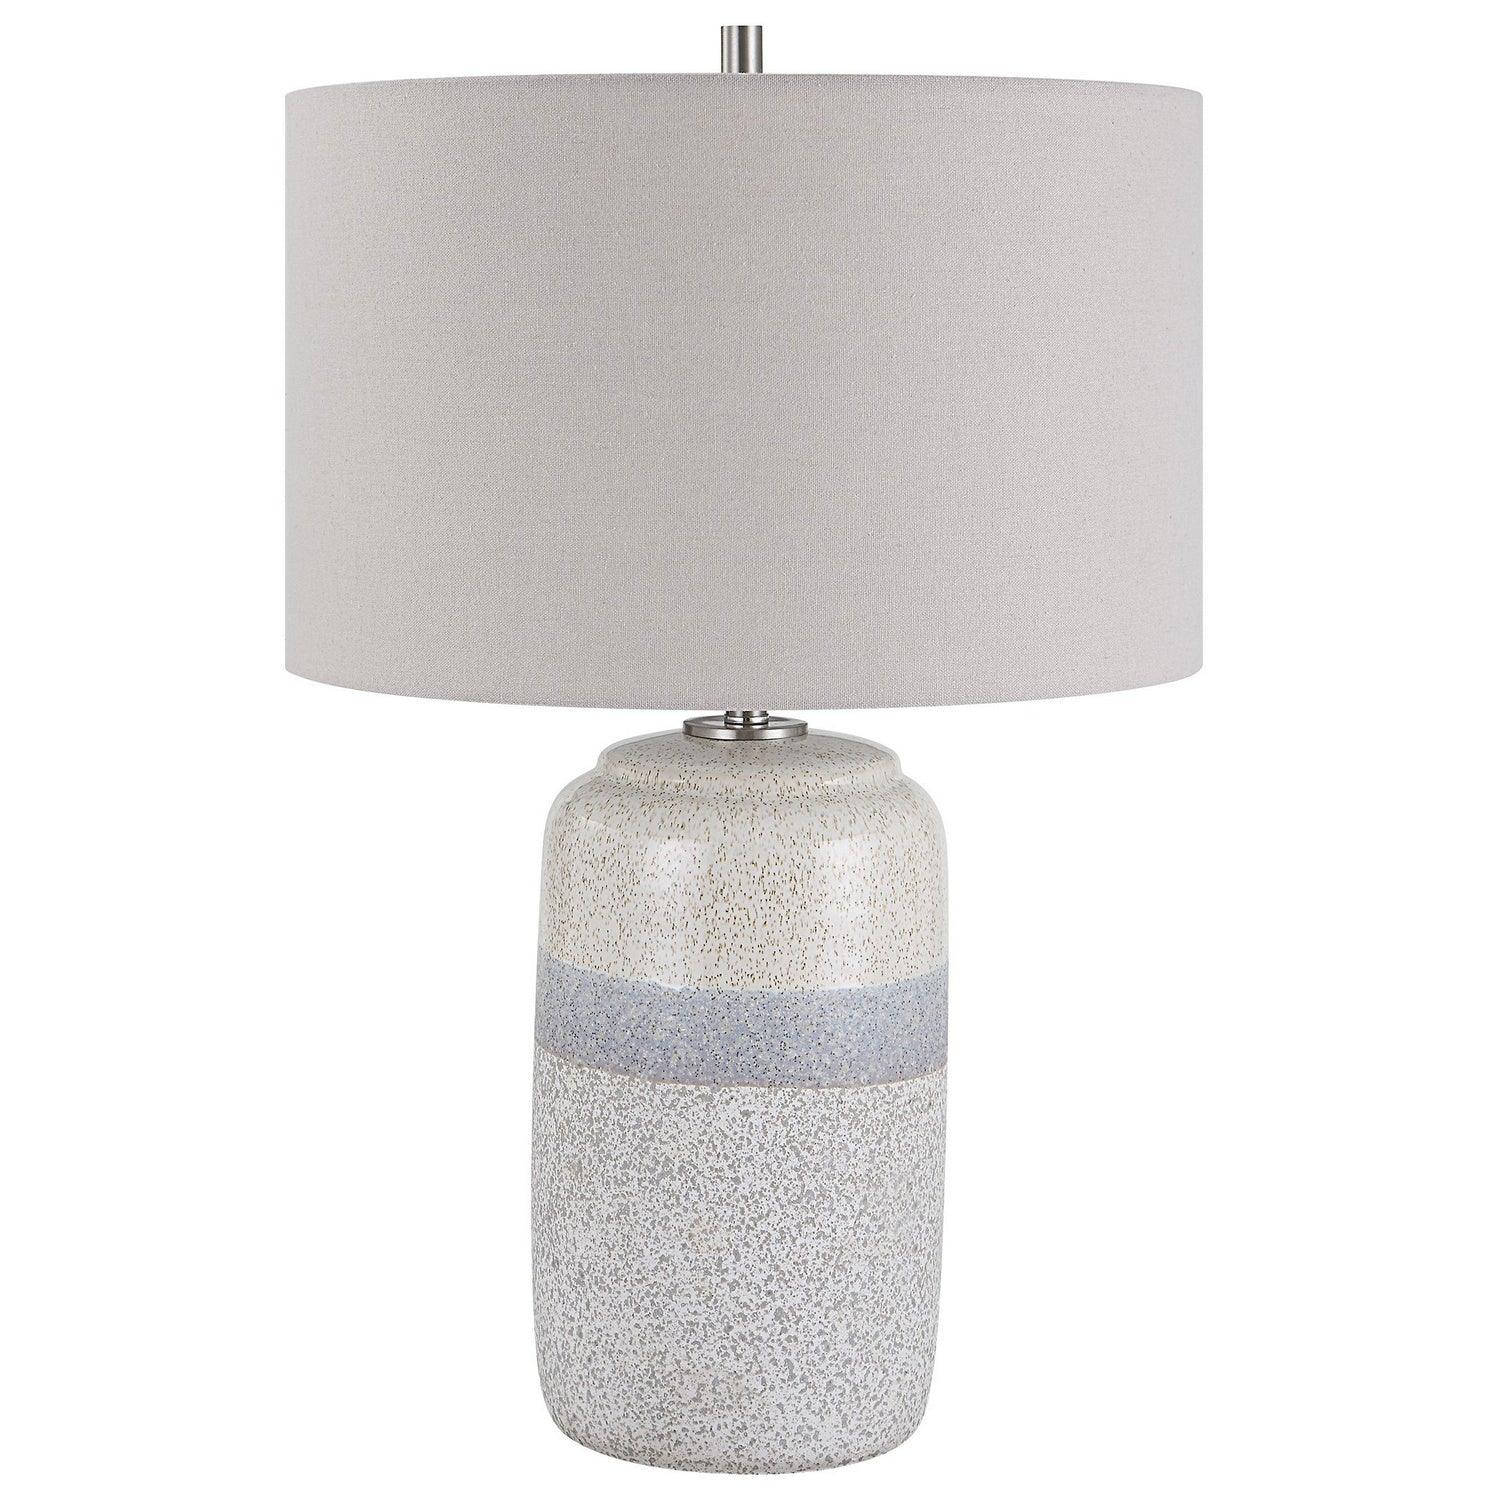 The Uttermost - Pinpoint Table Lamp - 30054-1 | Montreal Lighting & Hardware